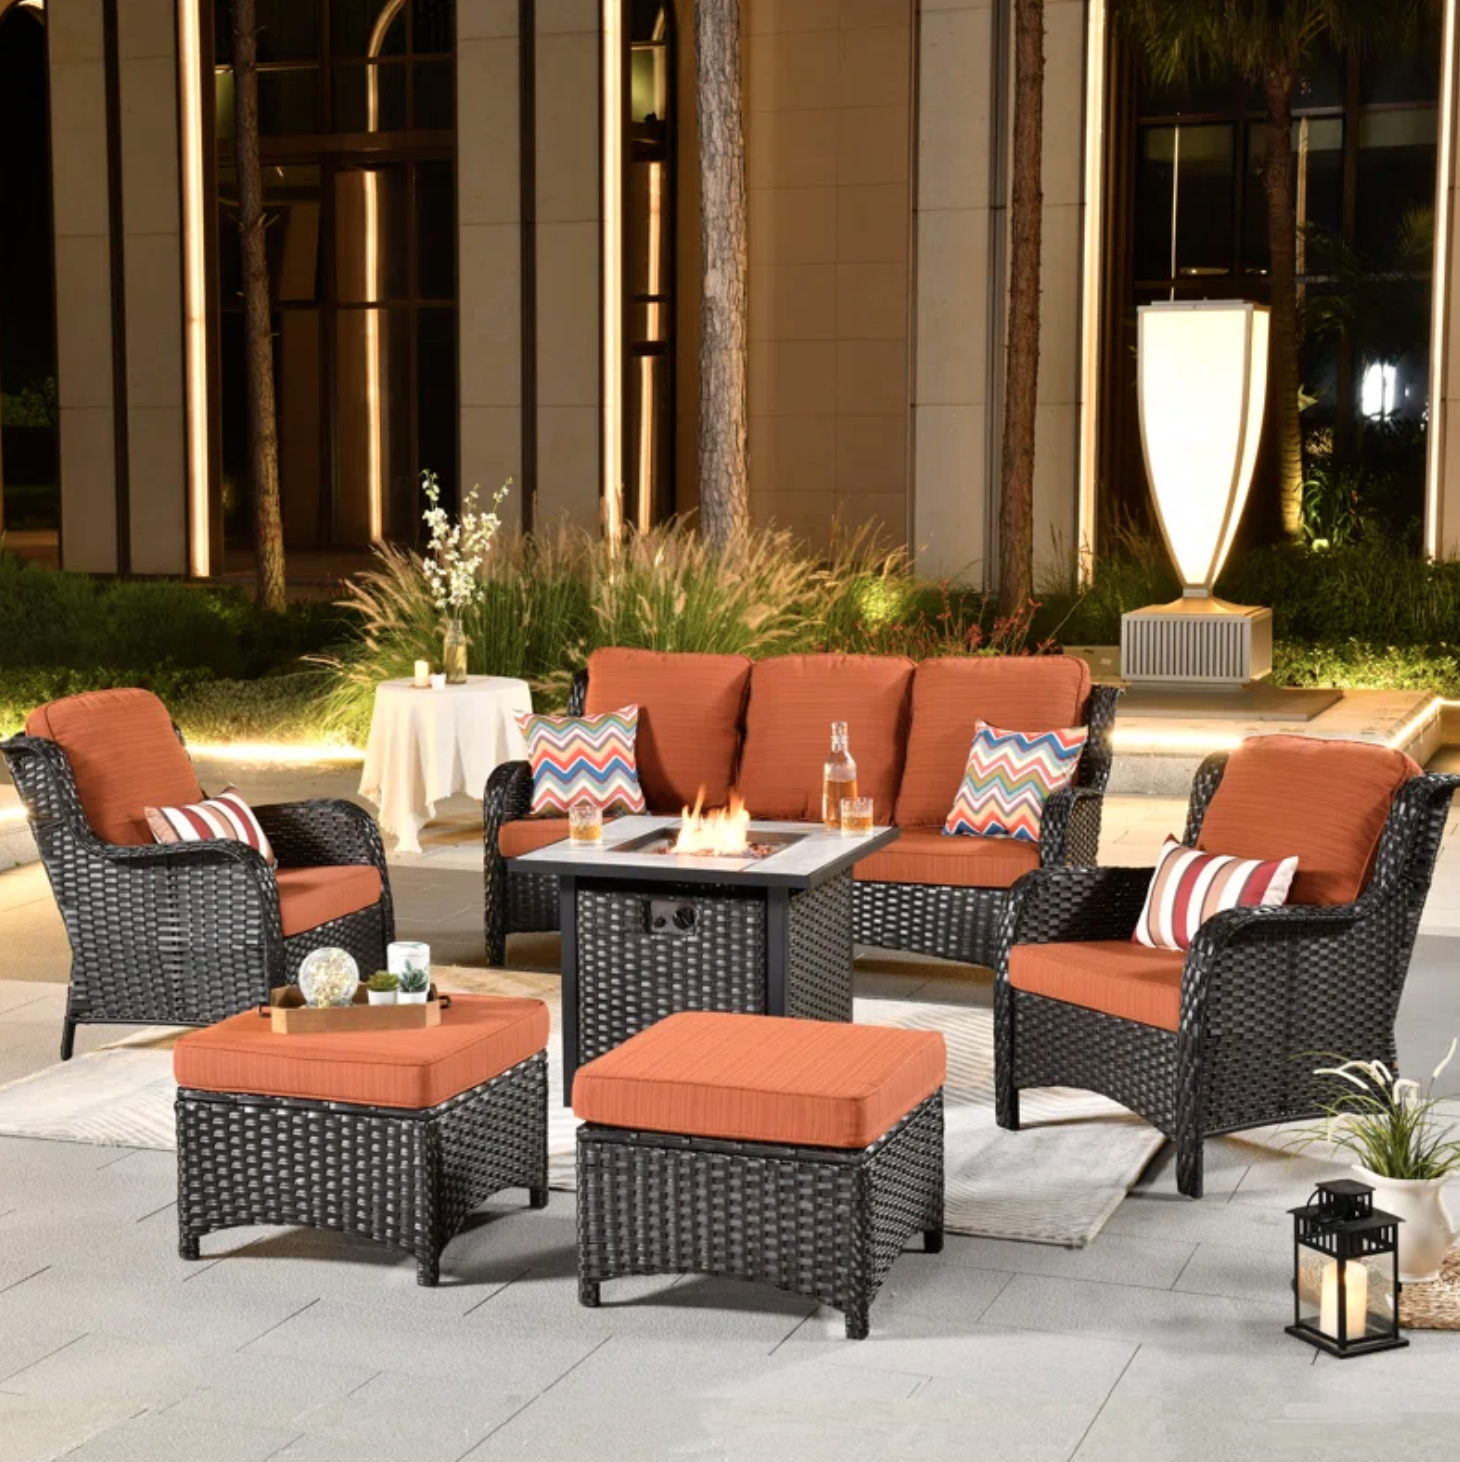 Outdoor furniture set with a fire pit table, two armchairs, a sofa, and decorative orange cushions